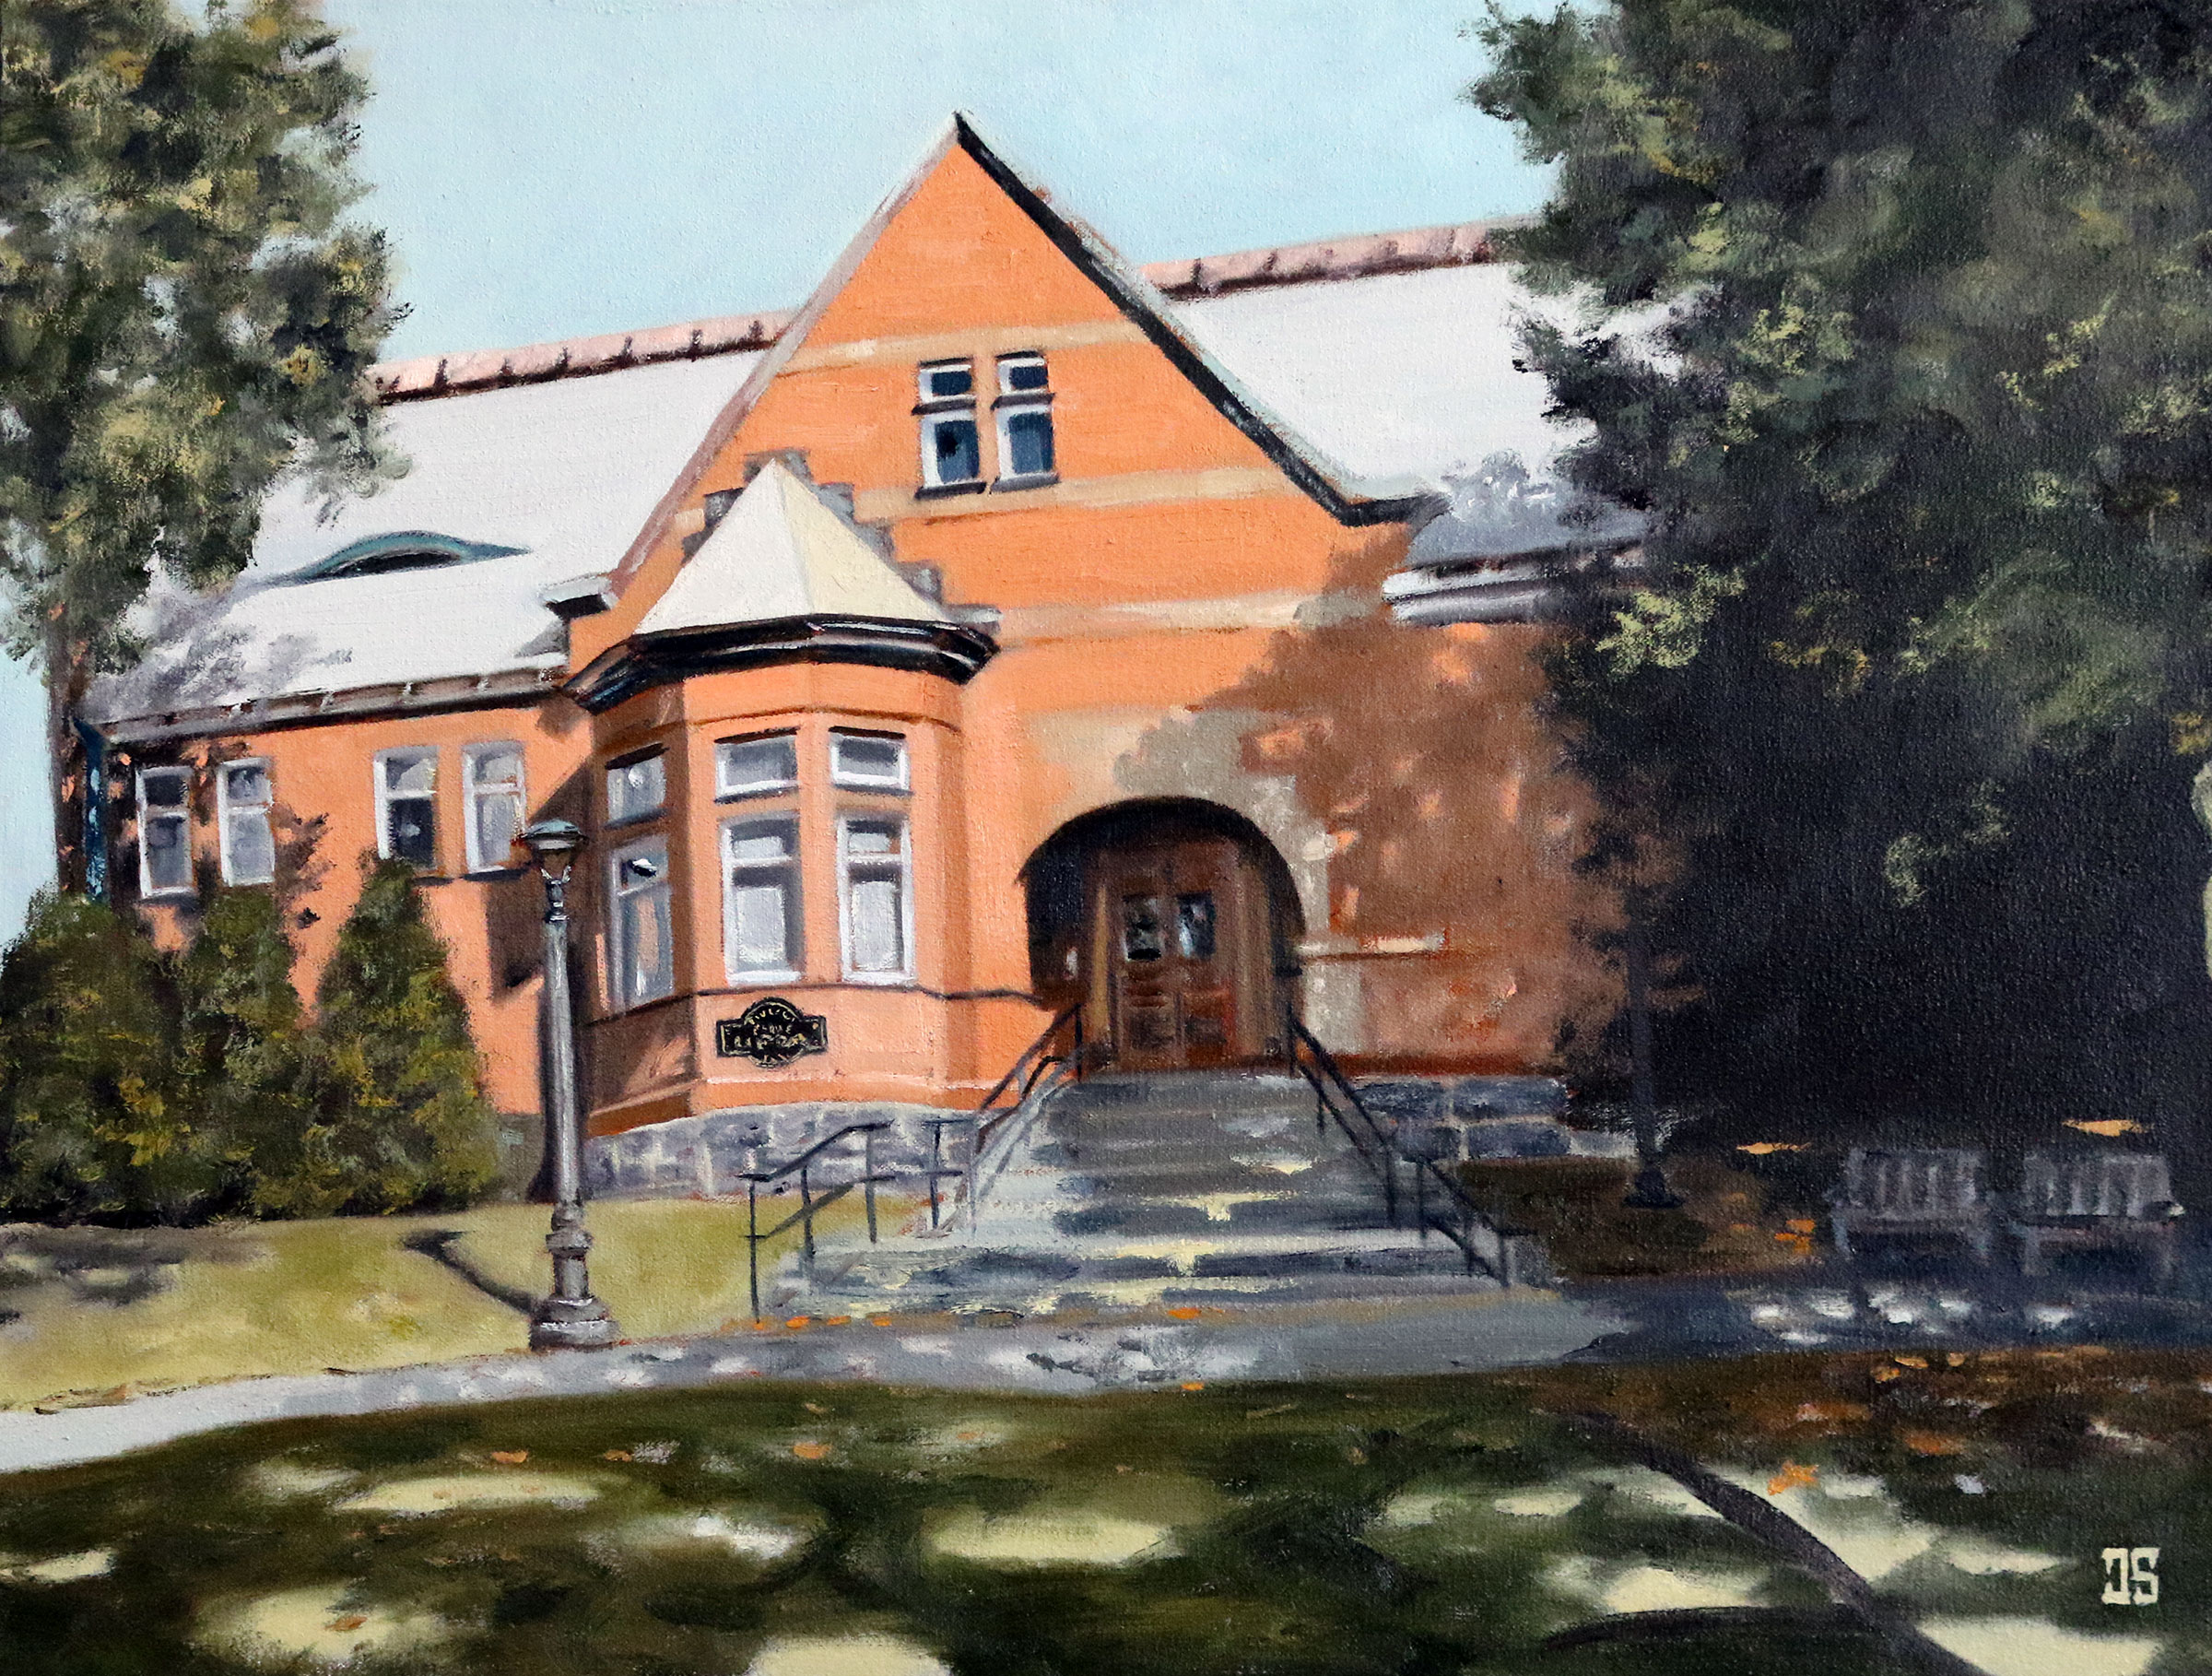 Oil painting "Eldredge Public Library, Chatham" by Jeffrey Dale Starr